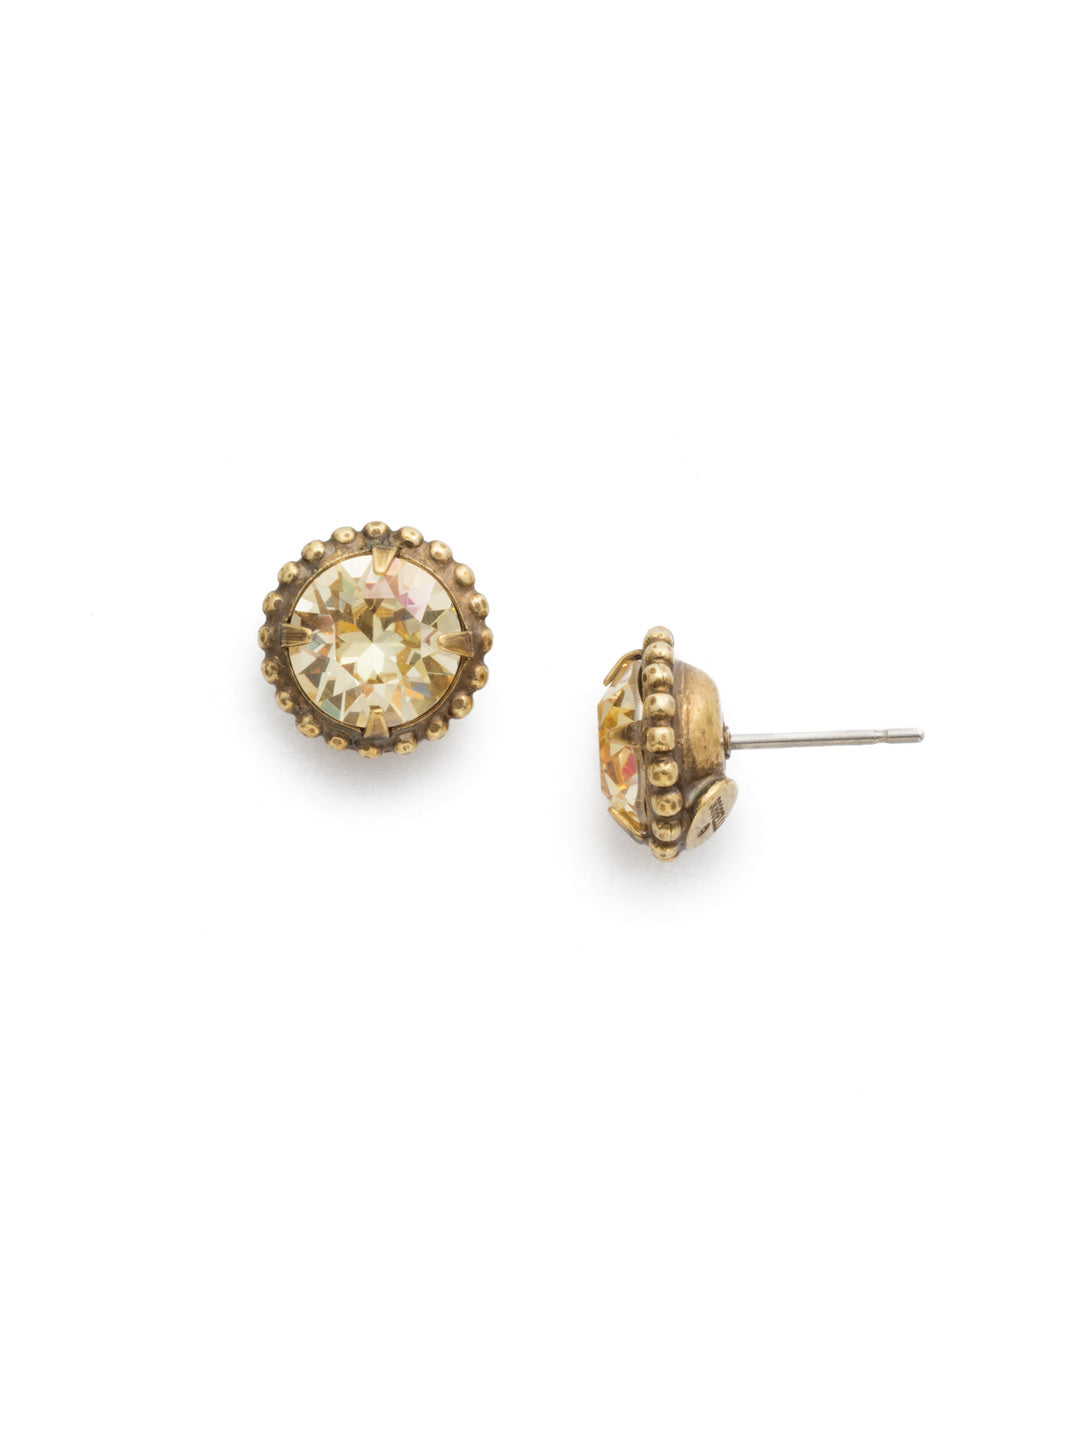 Simplicity Stud Earrings - EBY38AGCCH - <p>A timeless classic, the Simplicity Stud Earrings feature round cut crystals in a variety of colors; accented with a halo of metal beaded detail. Need help picking a stud? <a href="https://www.sorrelli.com/blogs/sisterhood/round-stud-earrings-101-a-rundown-of-sizes-styles-and-sparkle">Check out our size guide!</a> From Sorrelli's Crystal Champagne collection in our Antique Gold-tone finish.</p>